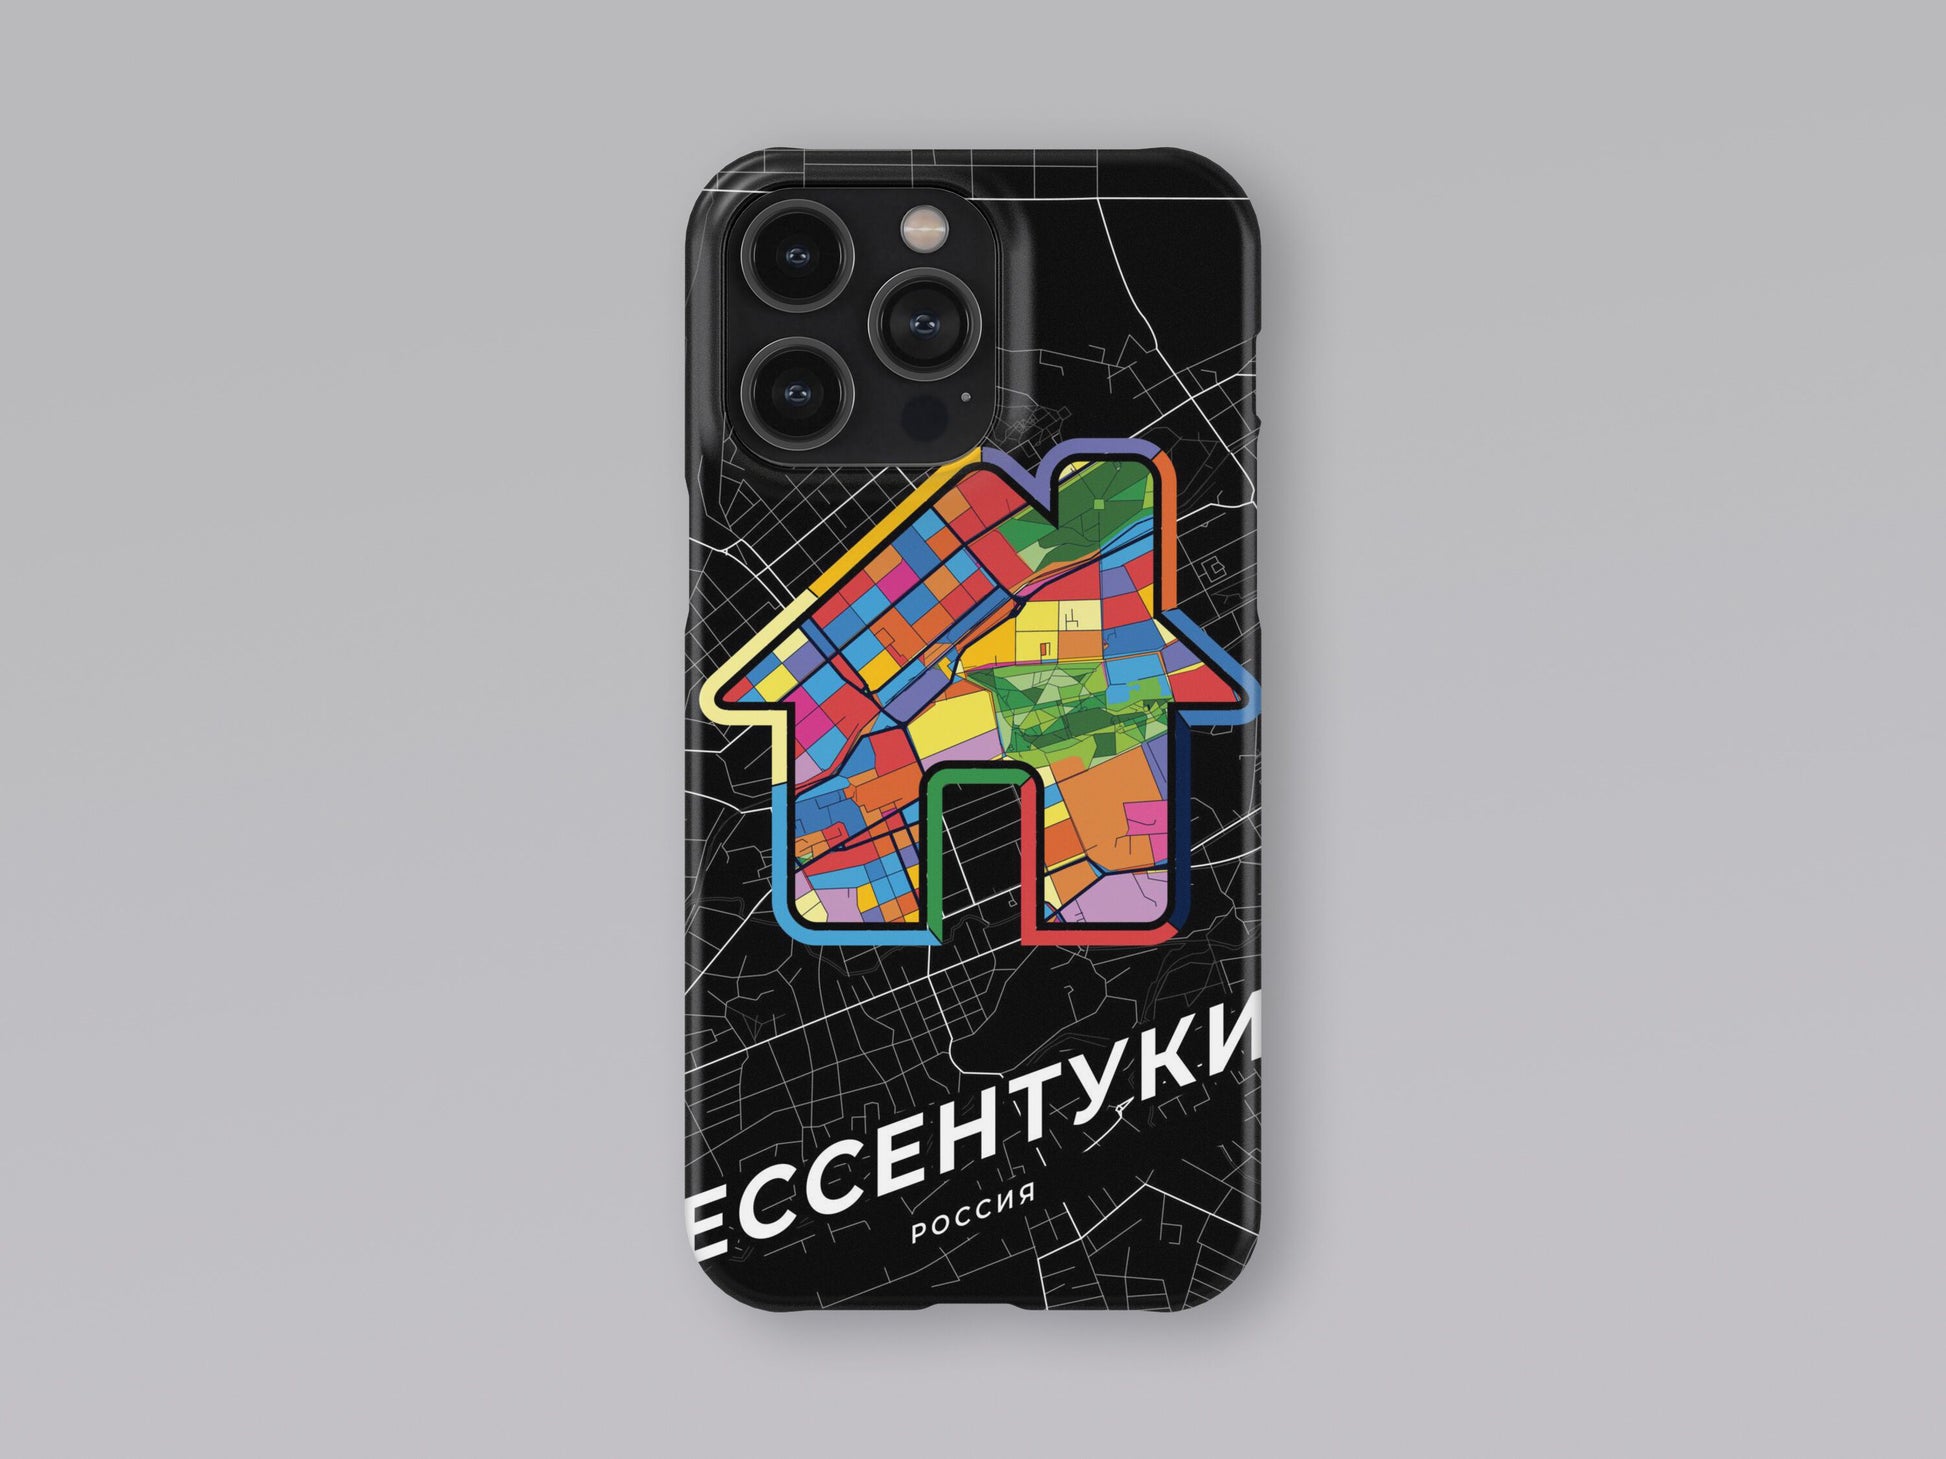 Yessentuki Russia slim phone case with colorful icon 3